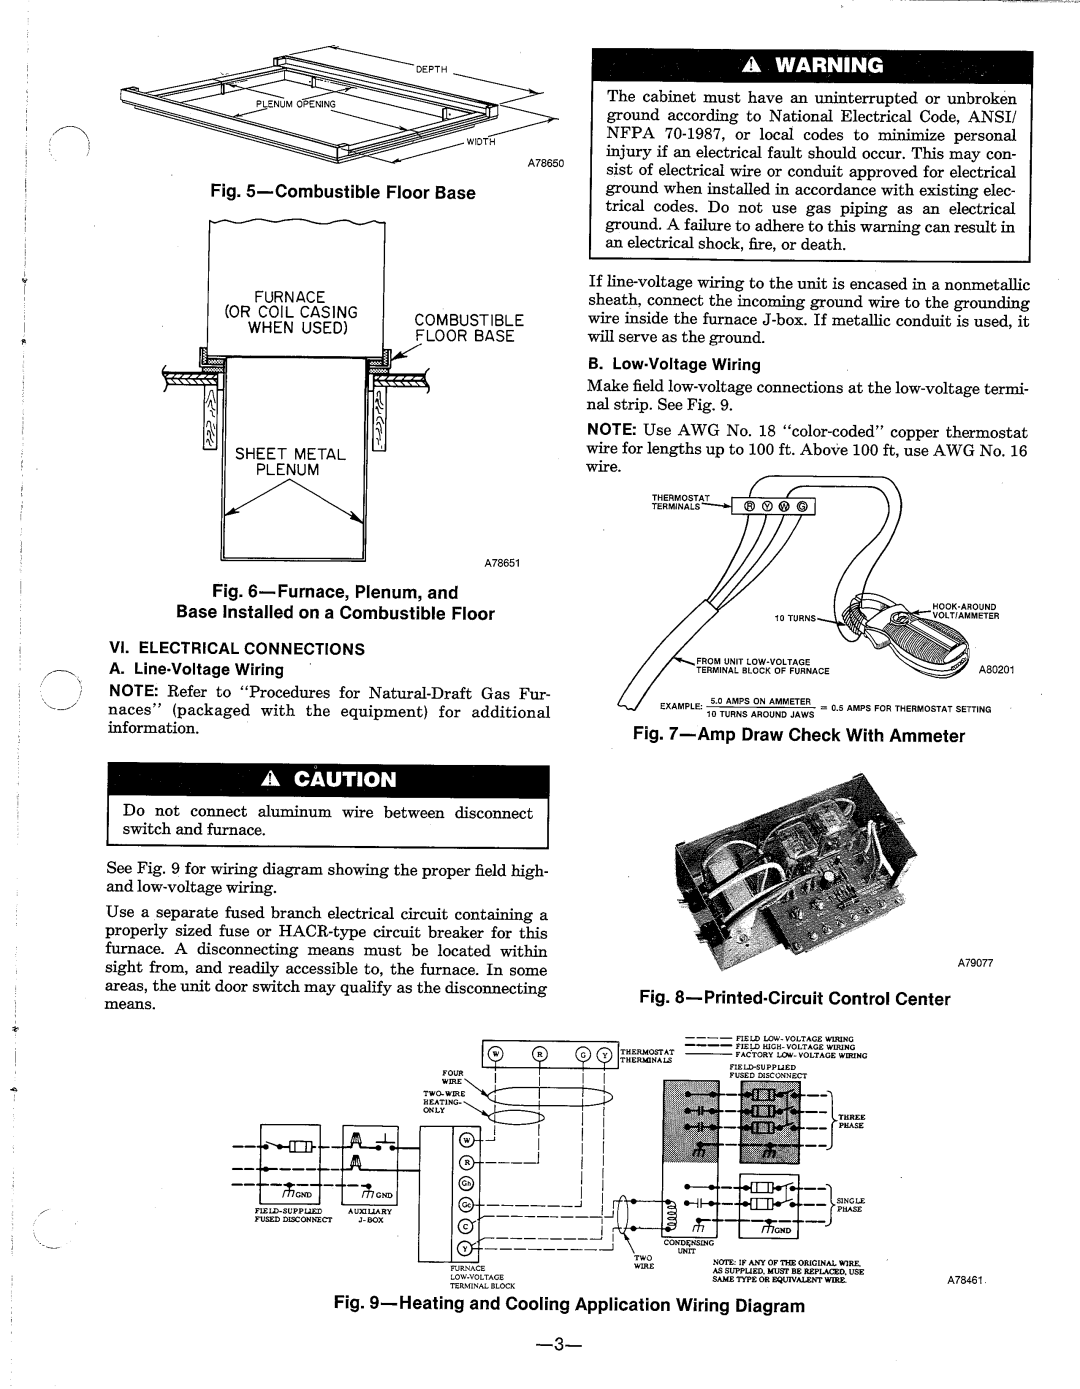 Carrier DR manual 